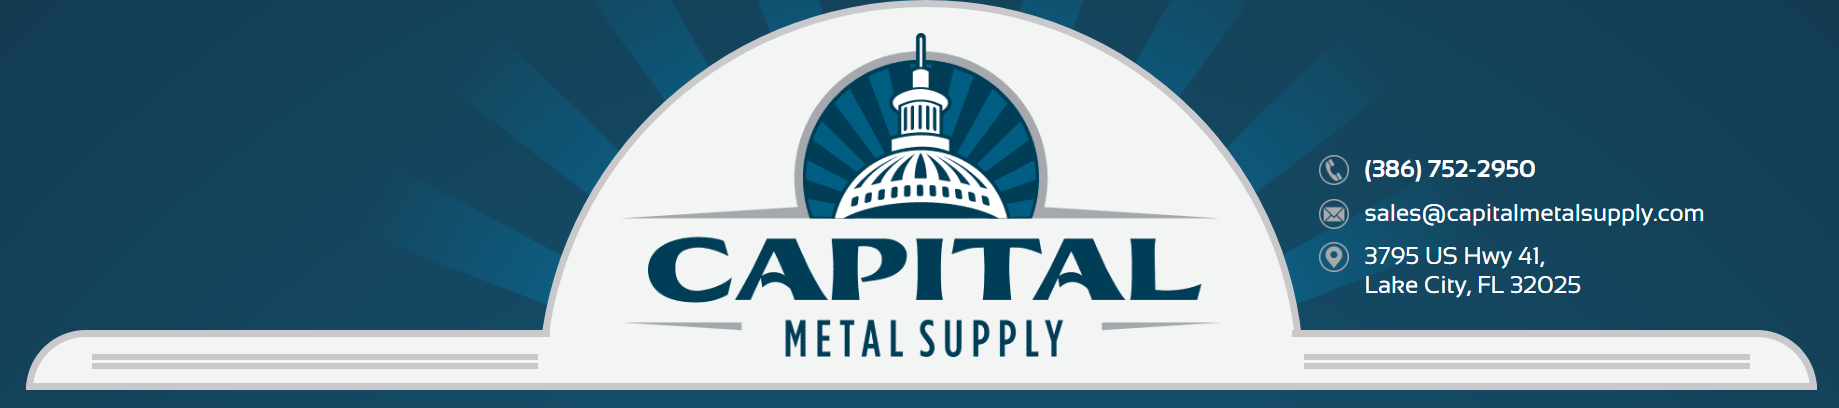 Capital Metal Supply cover